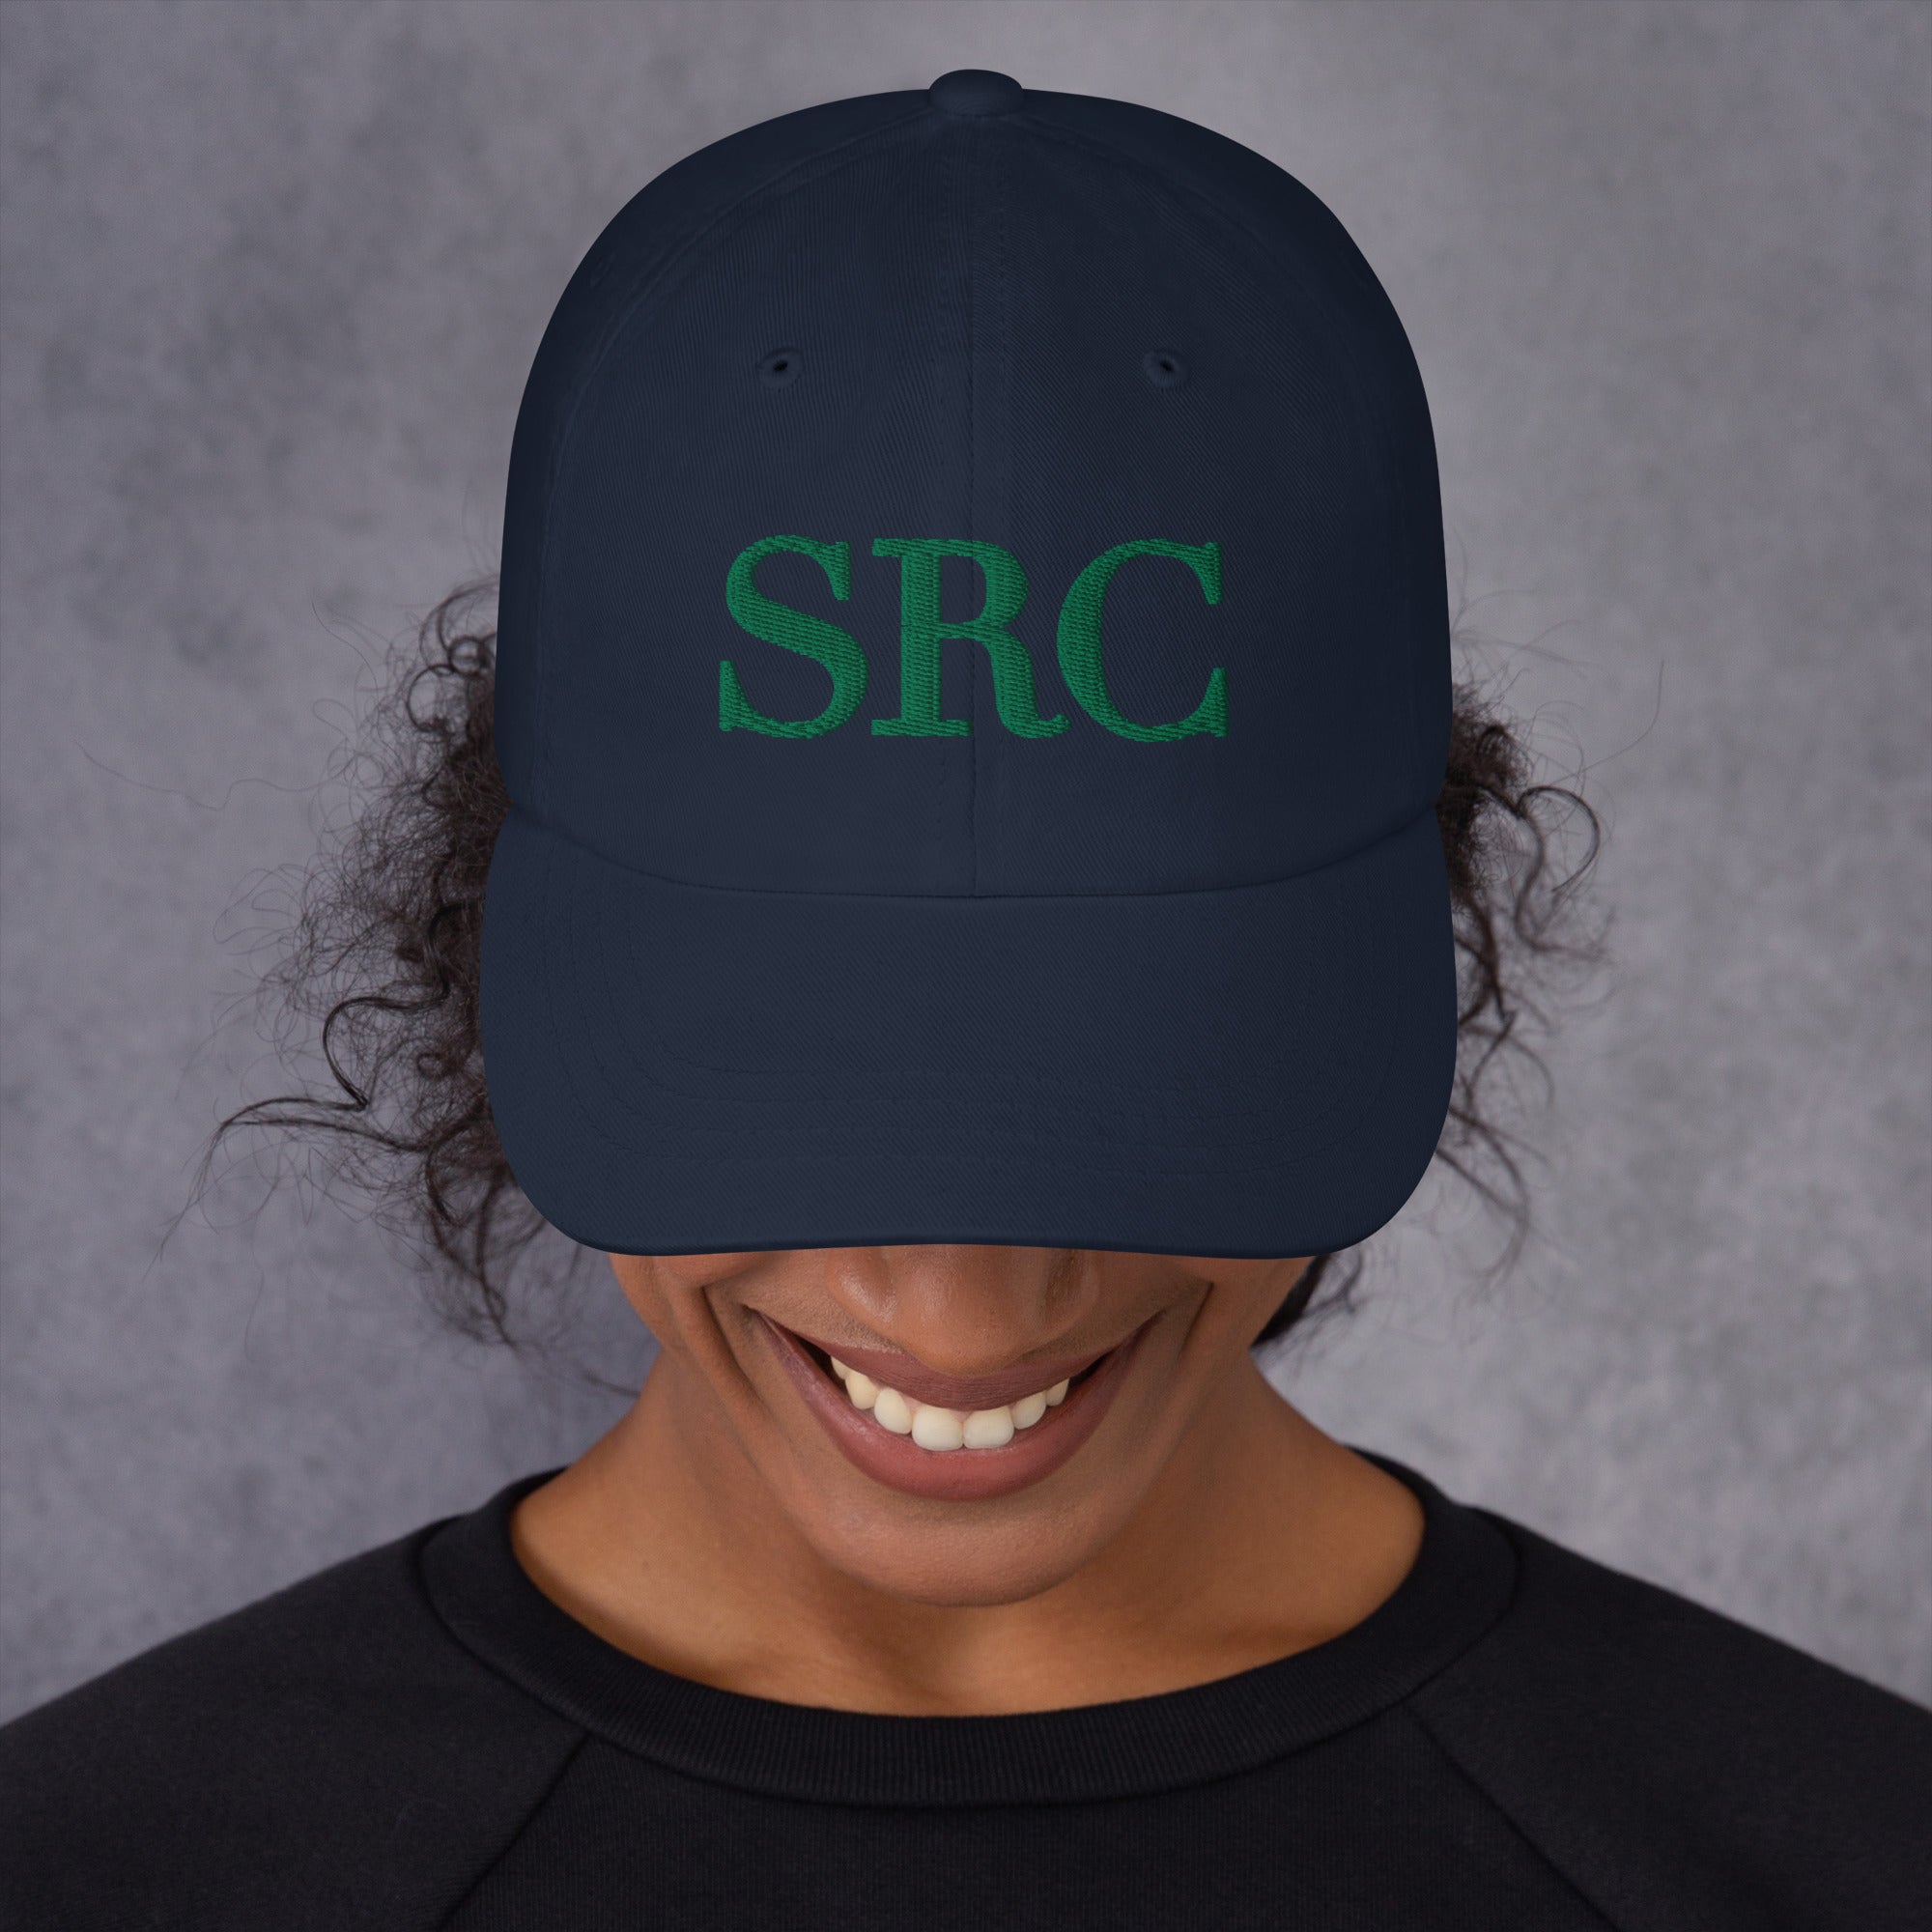 Rugby Imports Seacoast WR Adjustable Hat